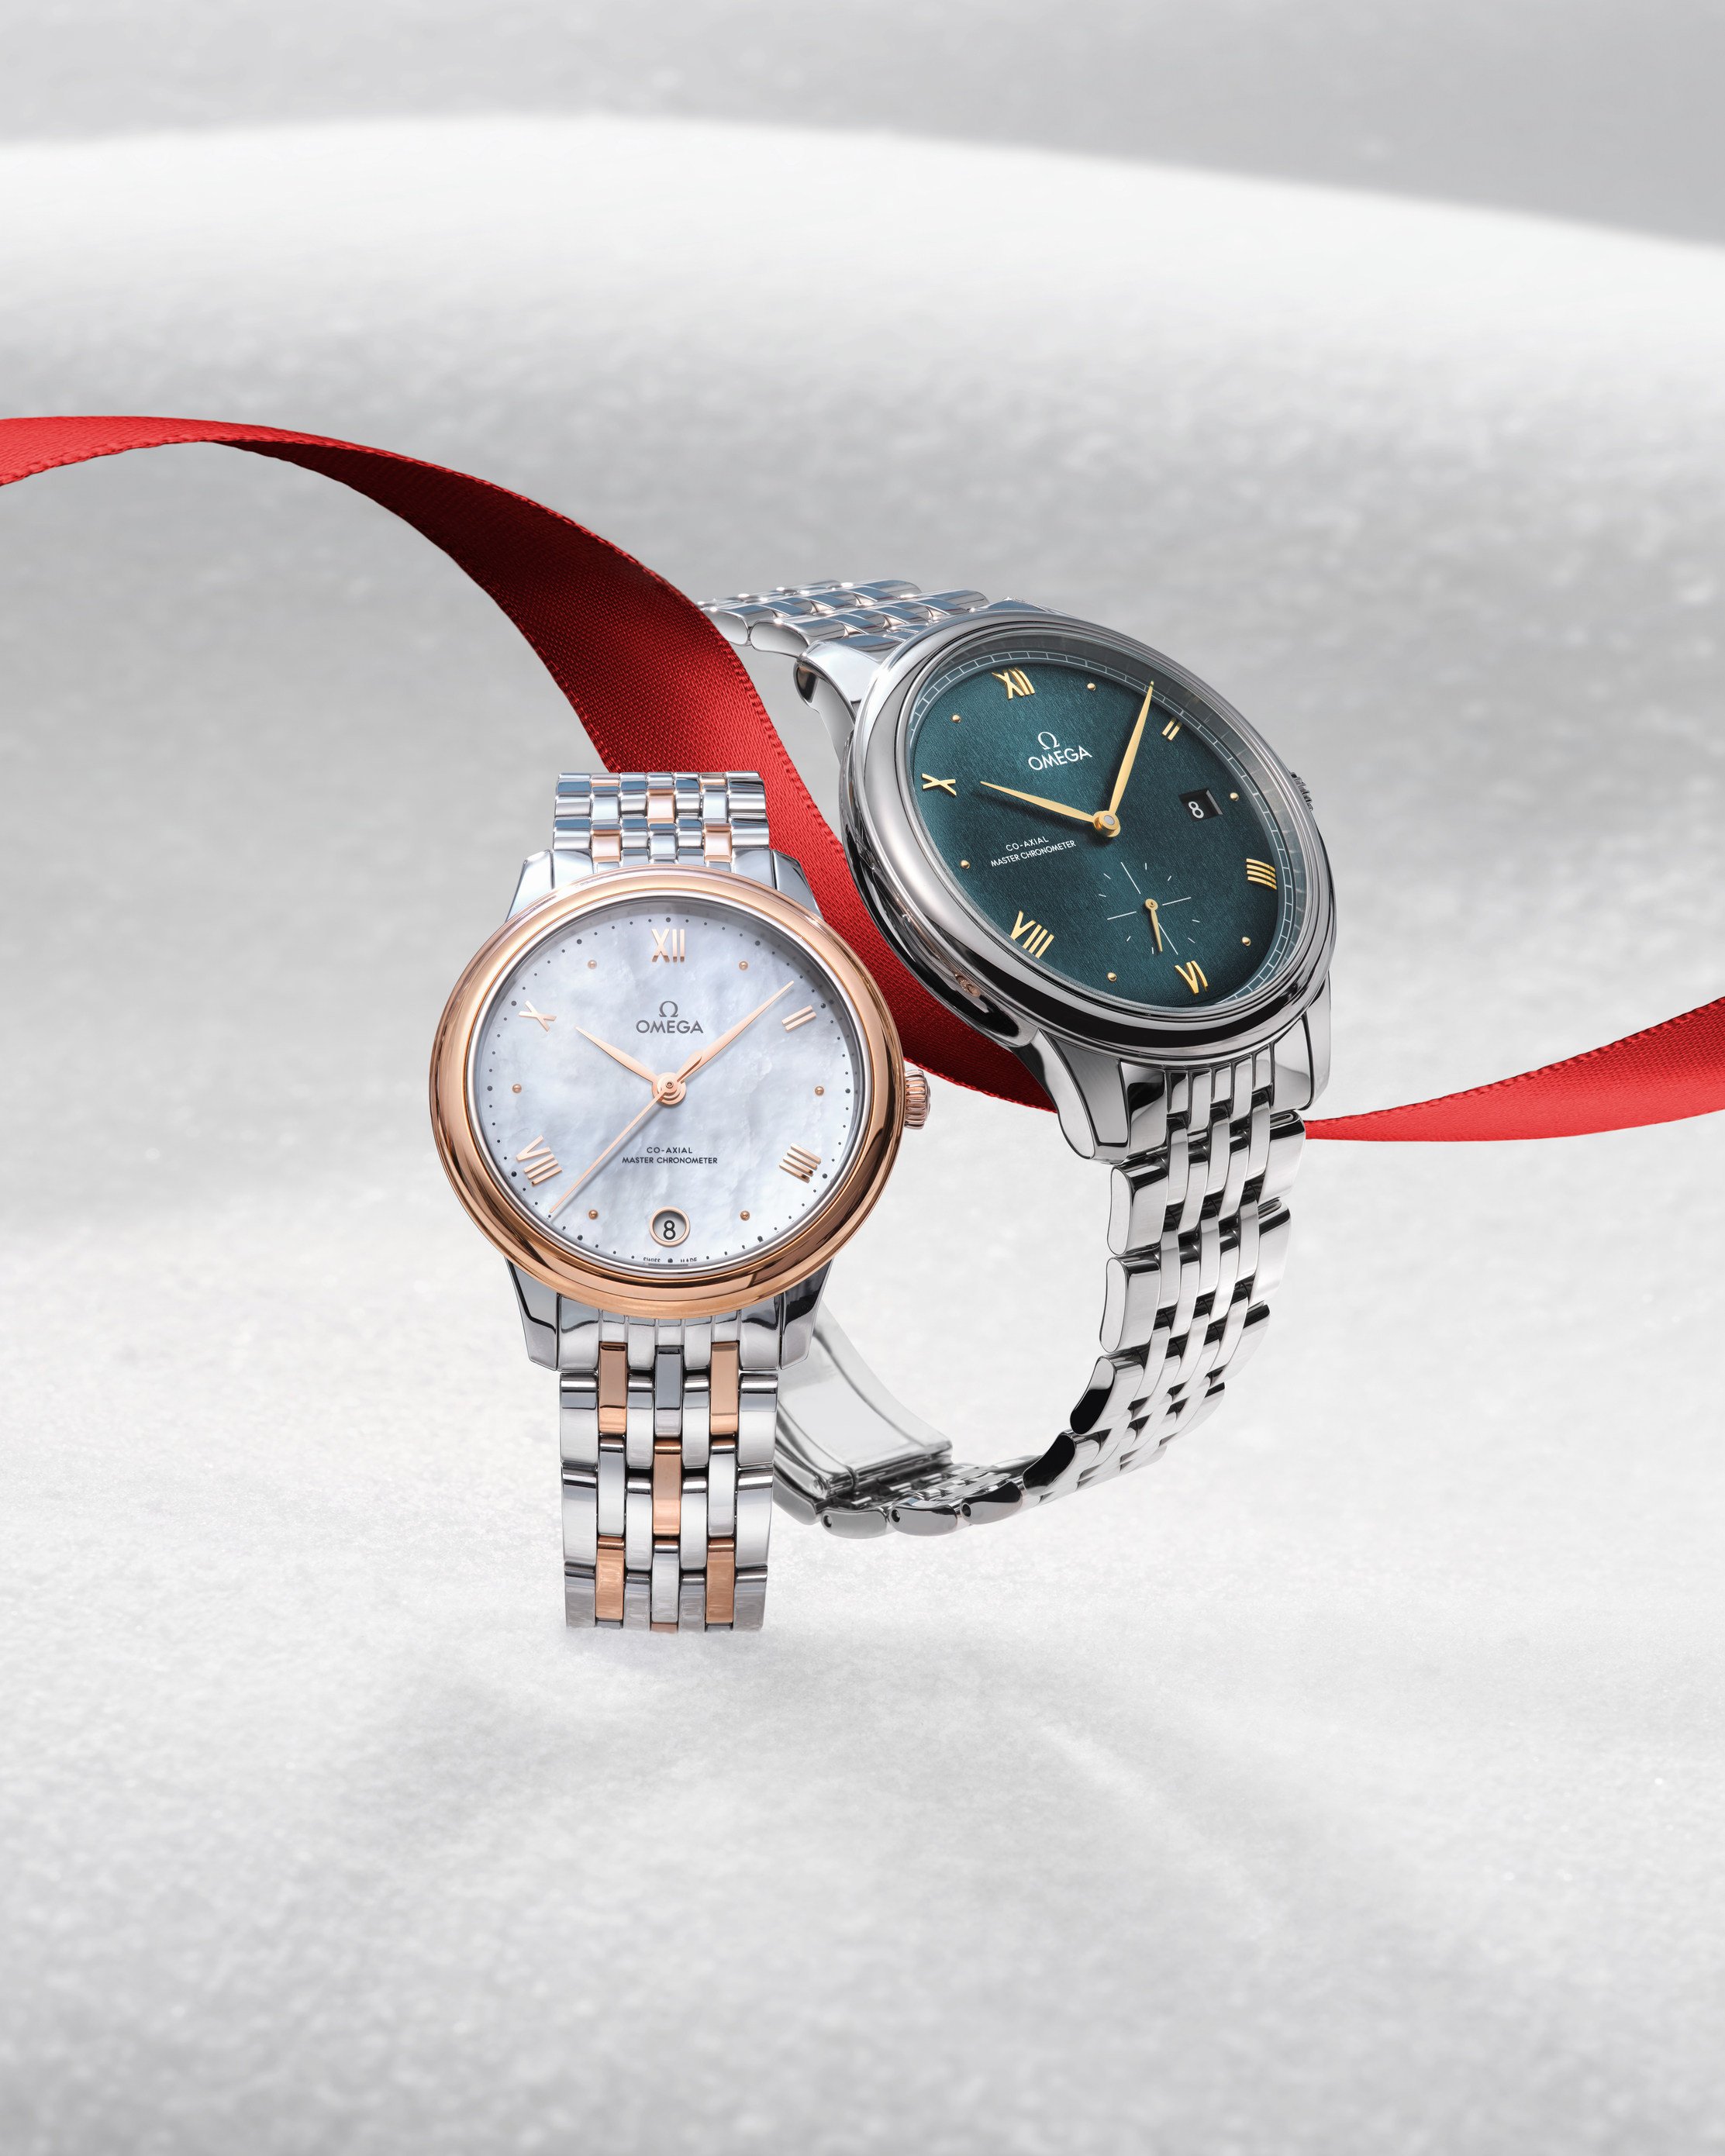 An Omega watch could make the perfect Christmas gift for a loved one. Photos: Handout